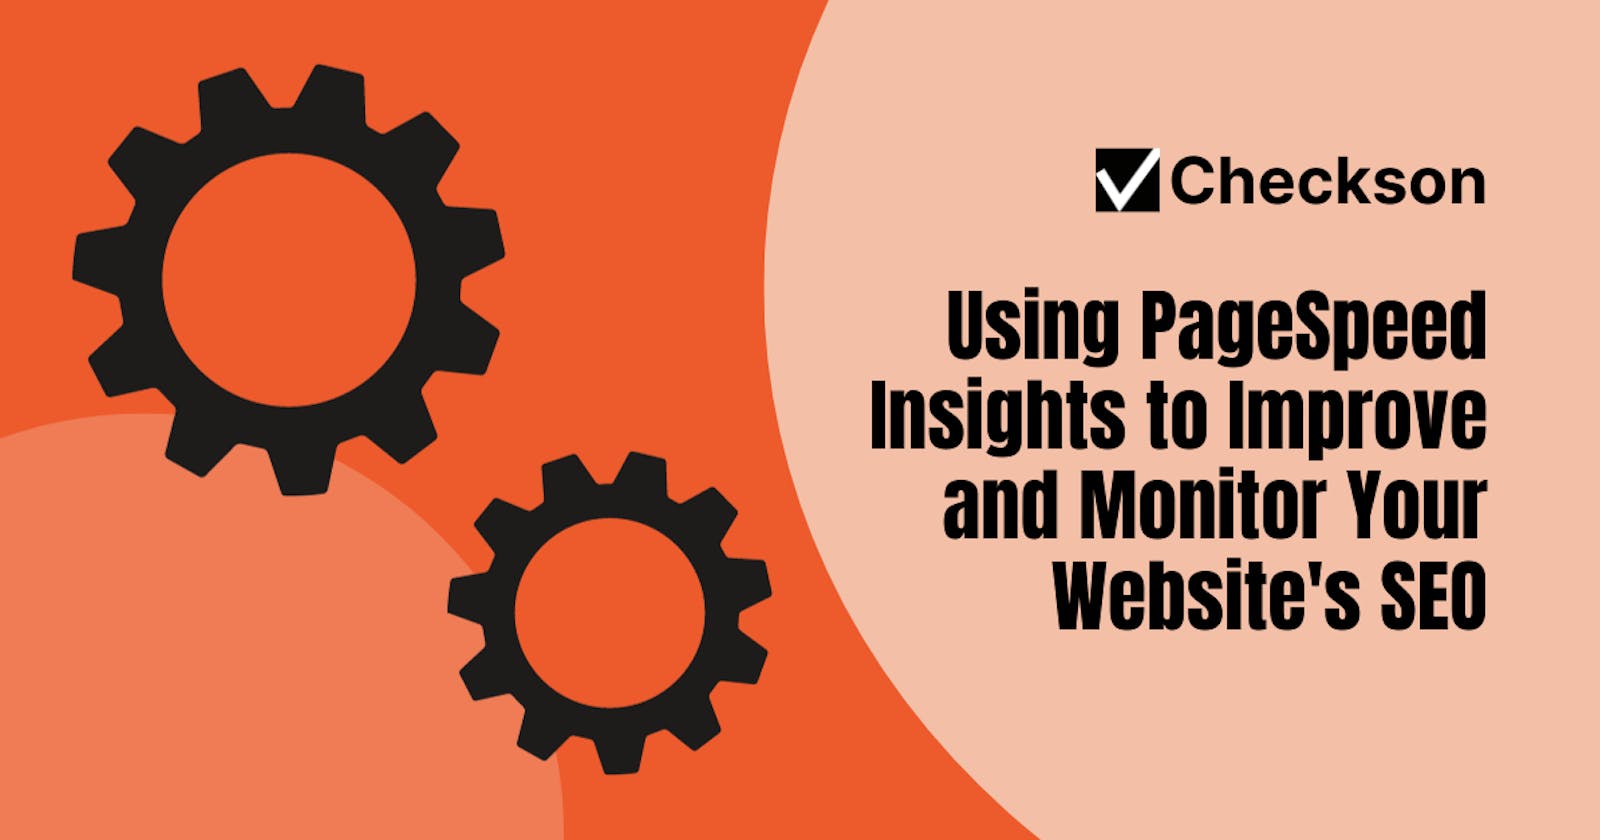 Using PageSpeed Insights to Improve and Monitor Your Website's SEO